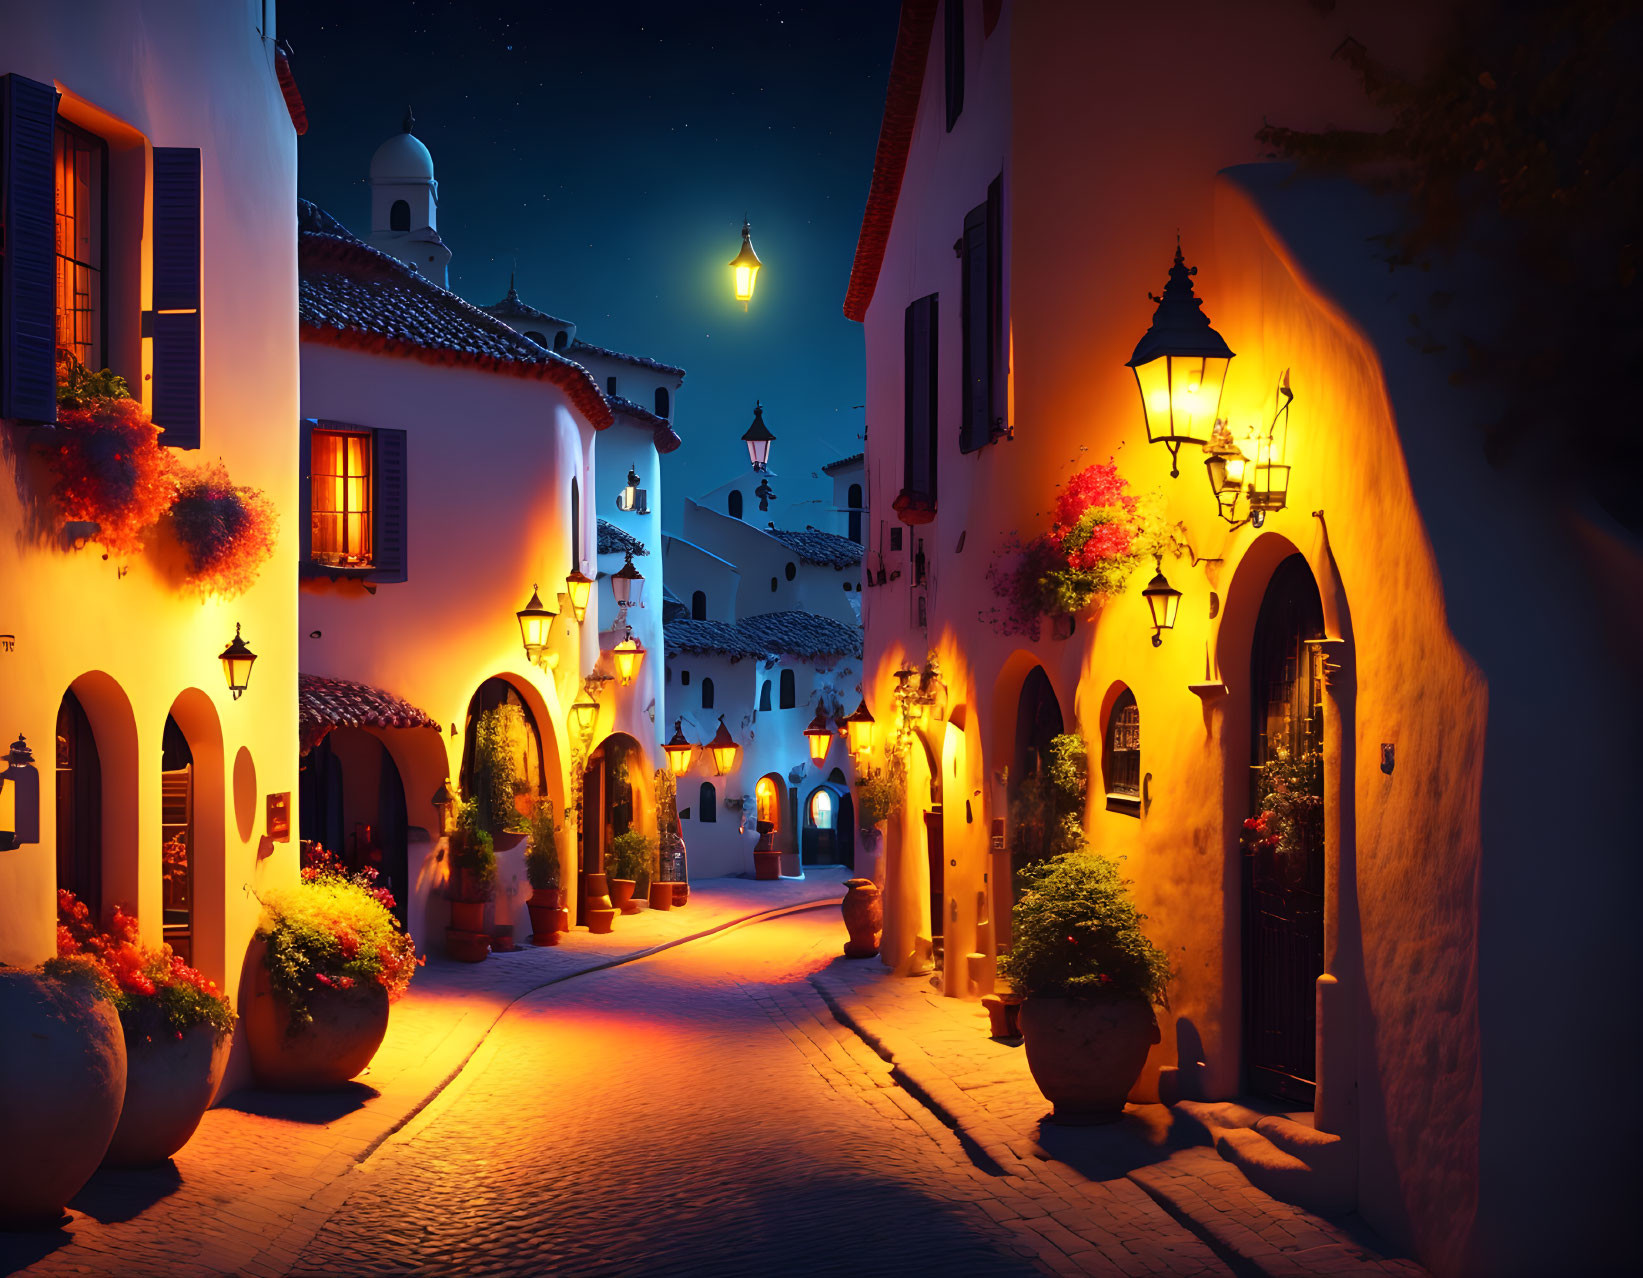 Charming alley night scene with cobblestone pavement and old-fashioned street lamps